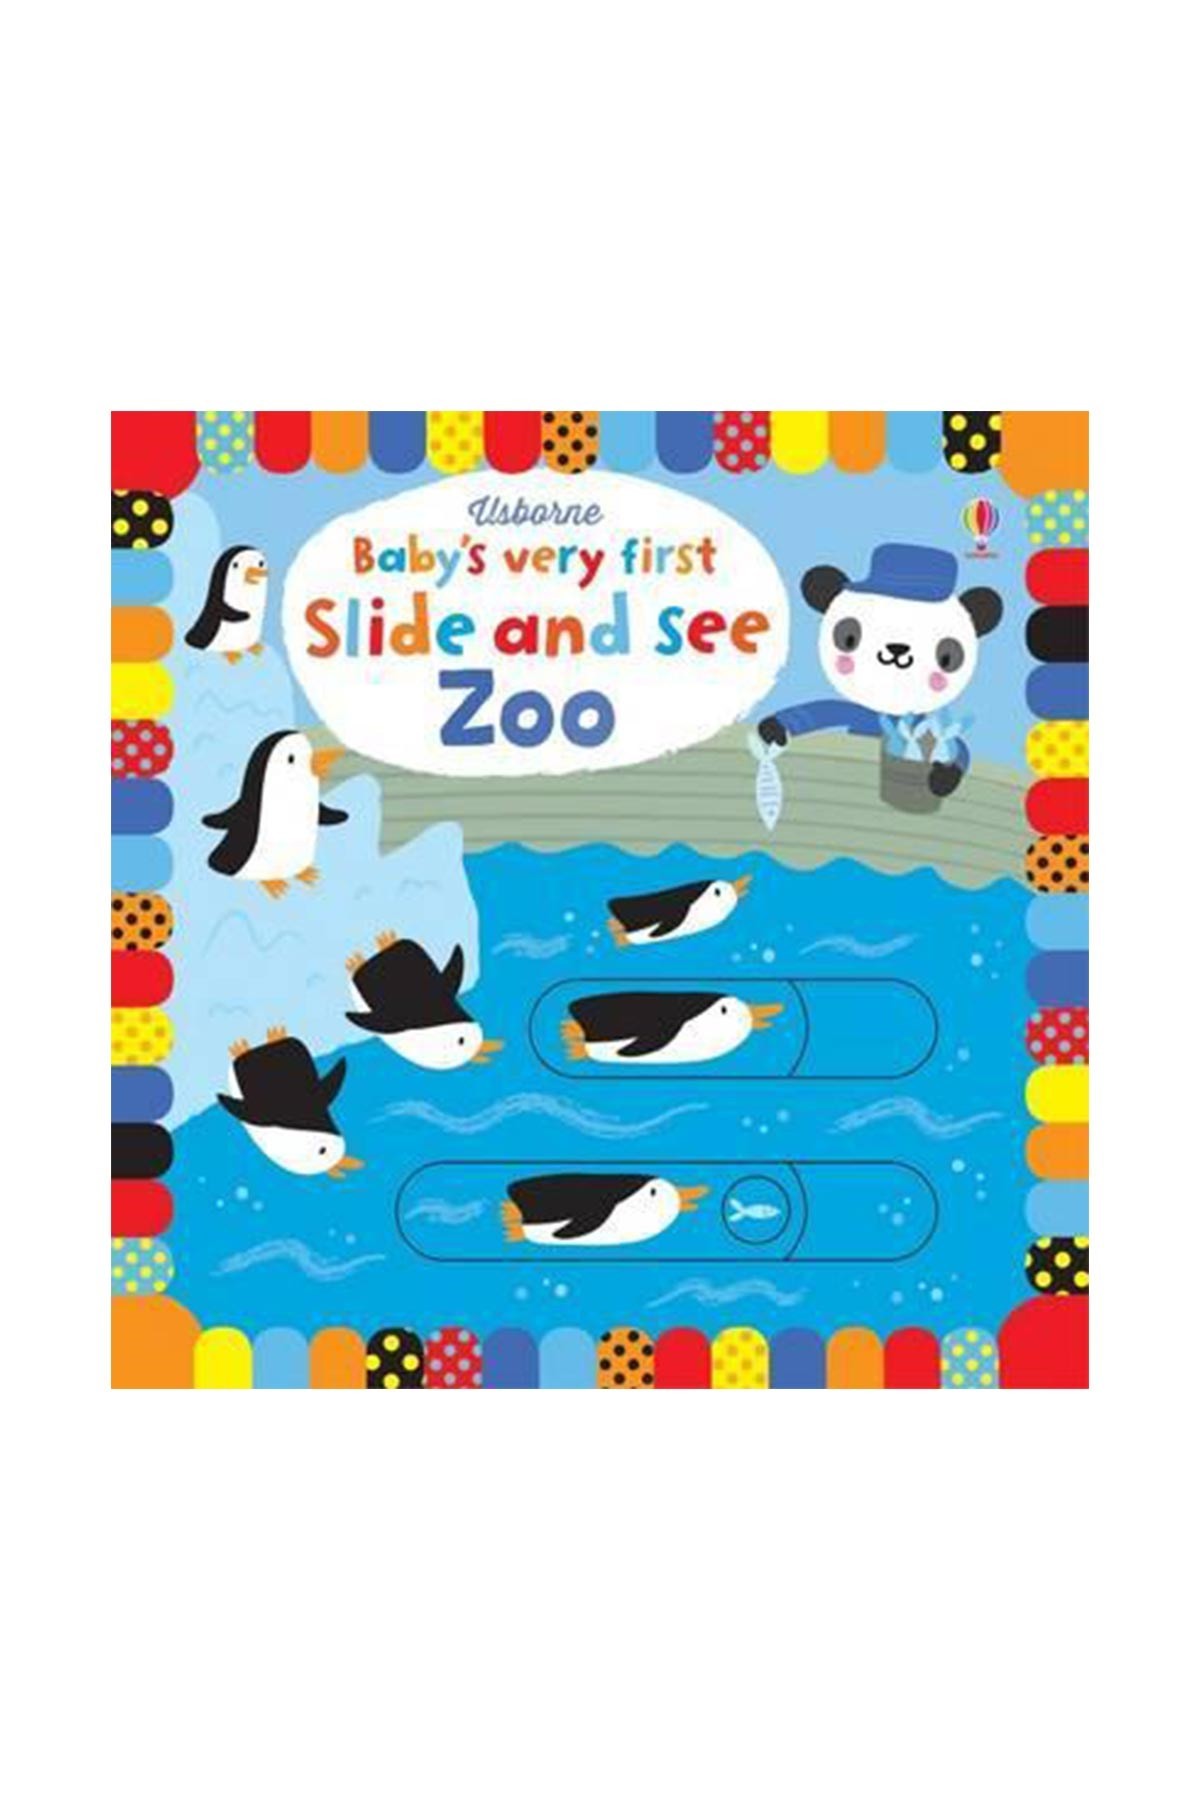 The Usborne BVF Slide and See Zoo